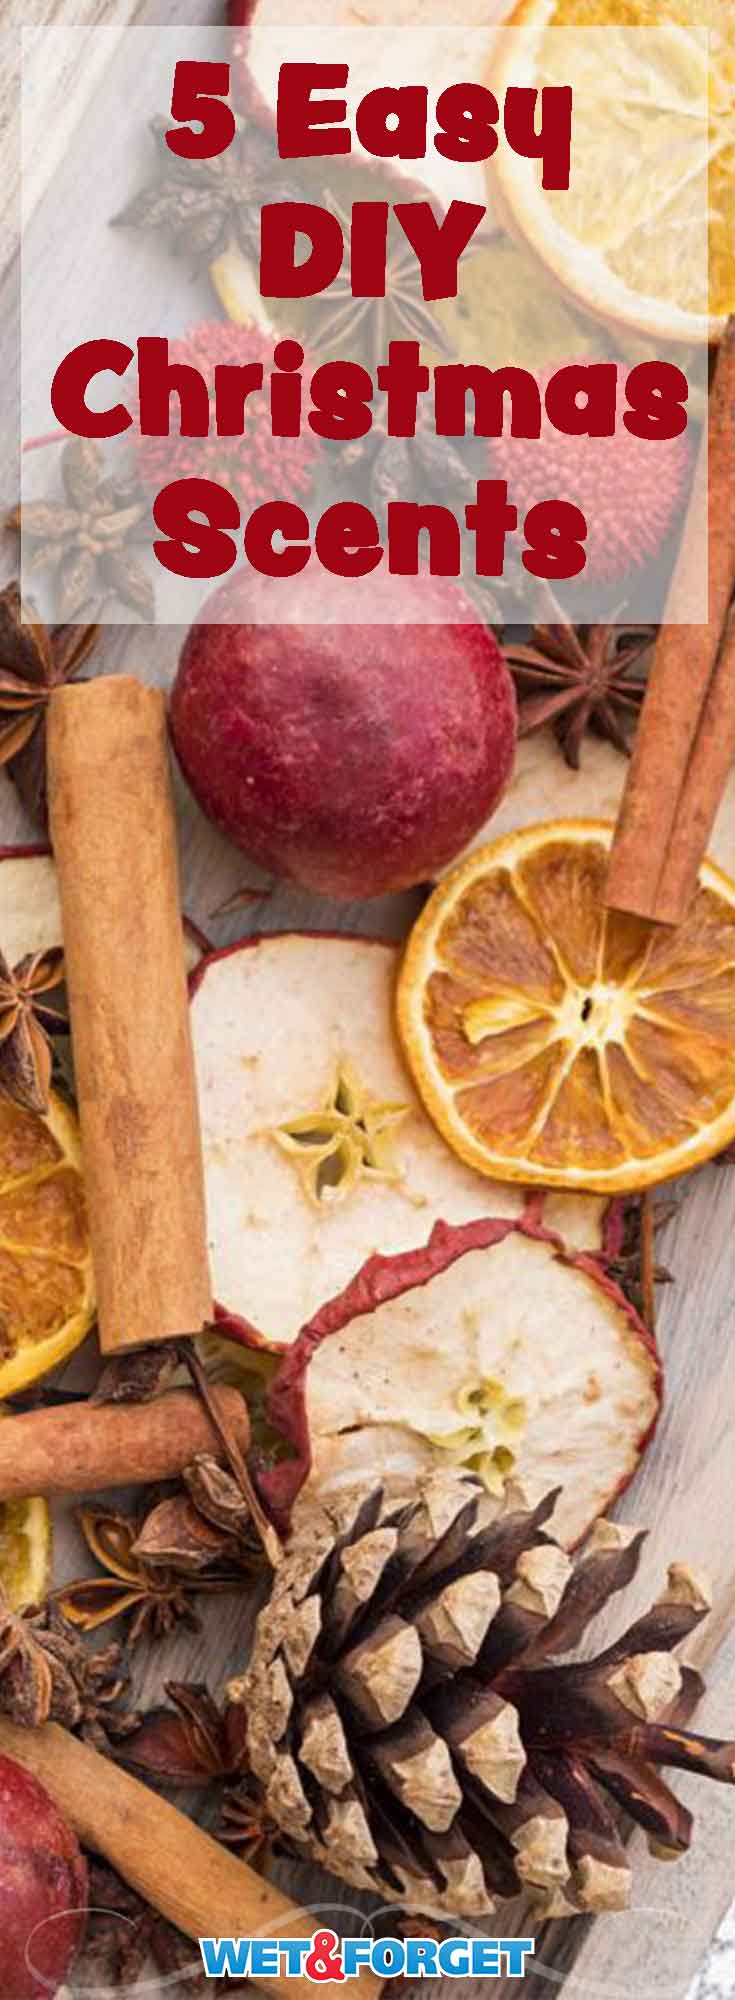 These festive fragrances are sure to welcome your guests this Christmas season! Learn how to make quick and easy DIY scents with using our favorite ideas. 